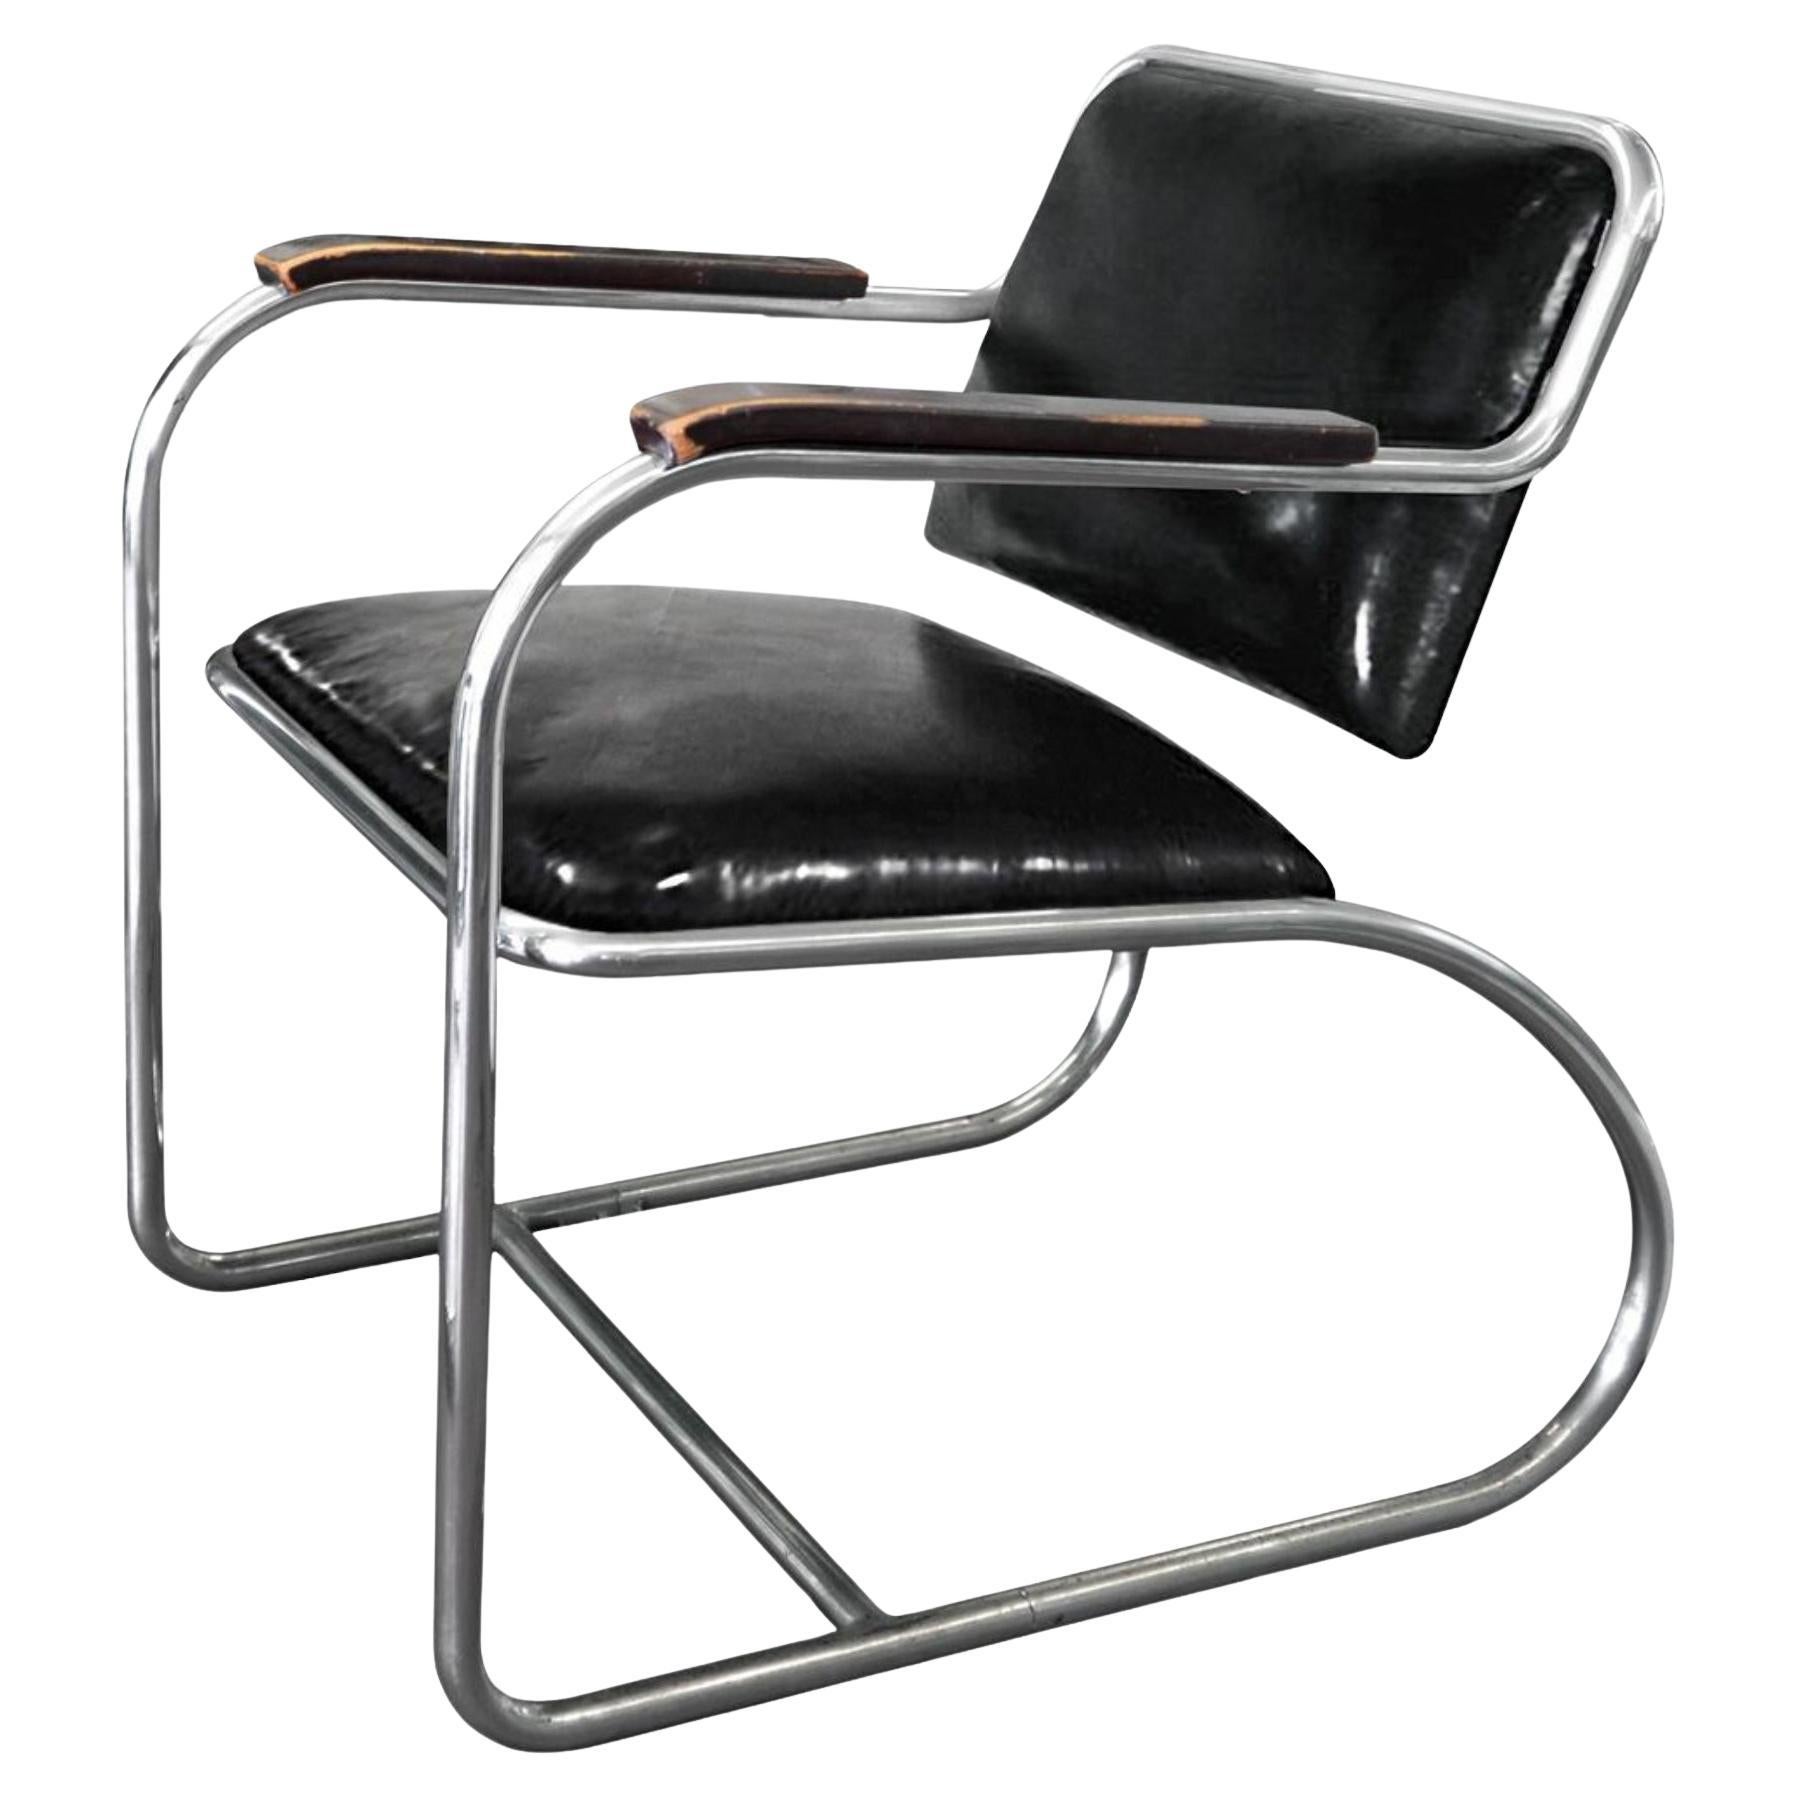 Bauhaus Tubular Steel Armchair by Mauser, Chromed Metall, Leather, Germany, 1936 For Sale